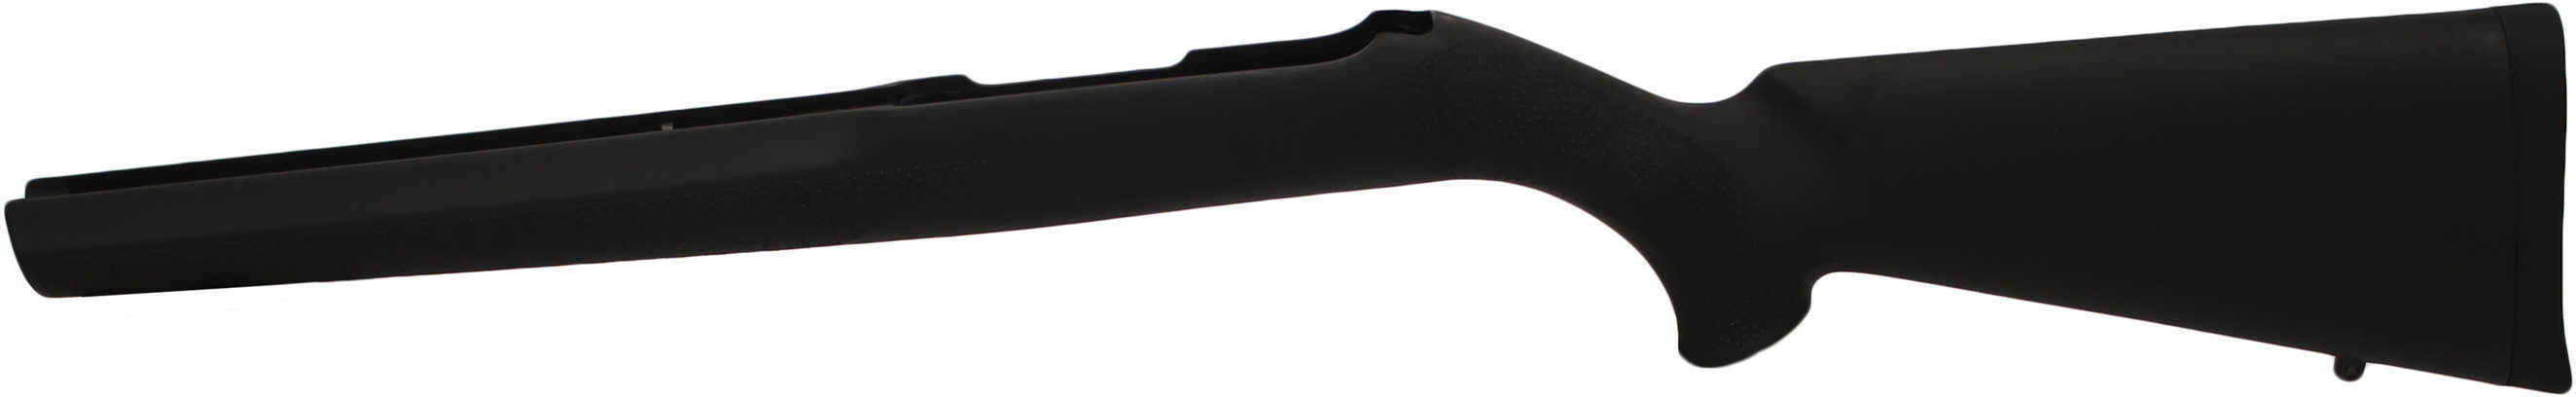 Hogue Rubber Overmolded Stock for Ruger 10-22 Bull (.920) Barrel 22010